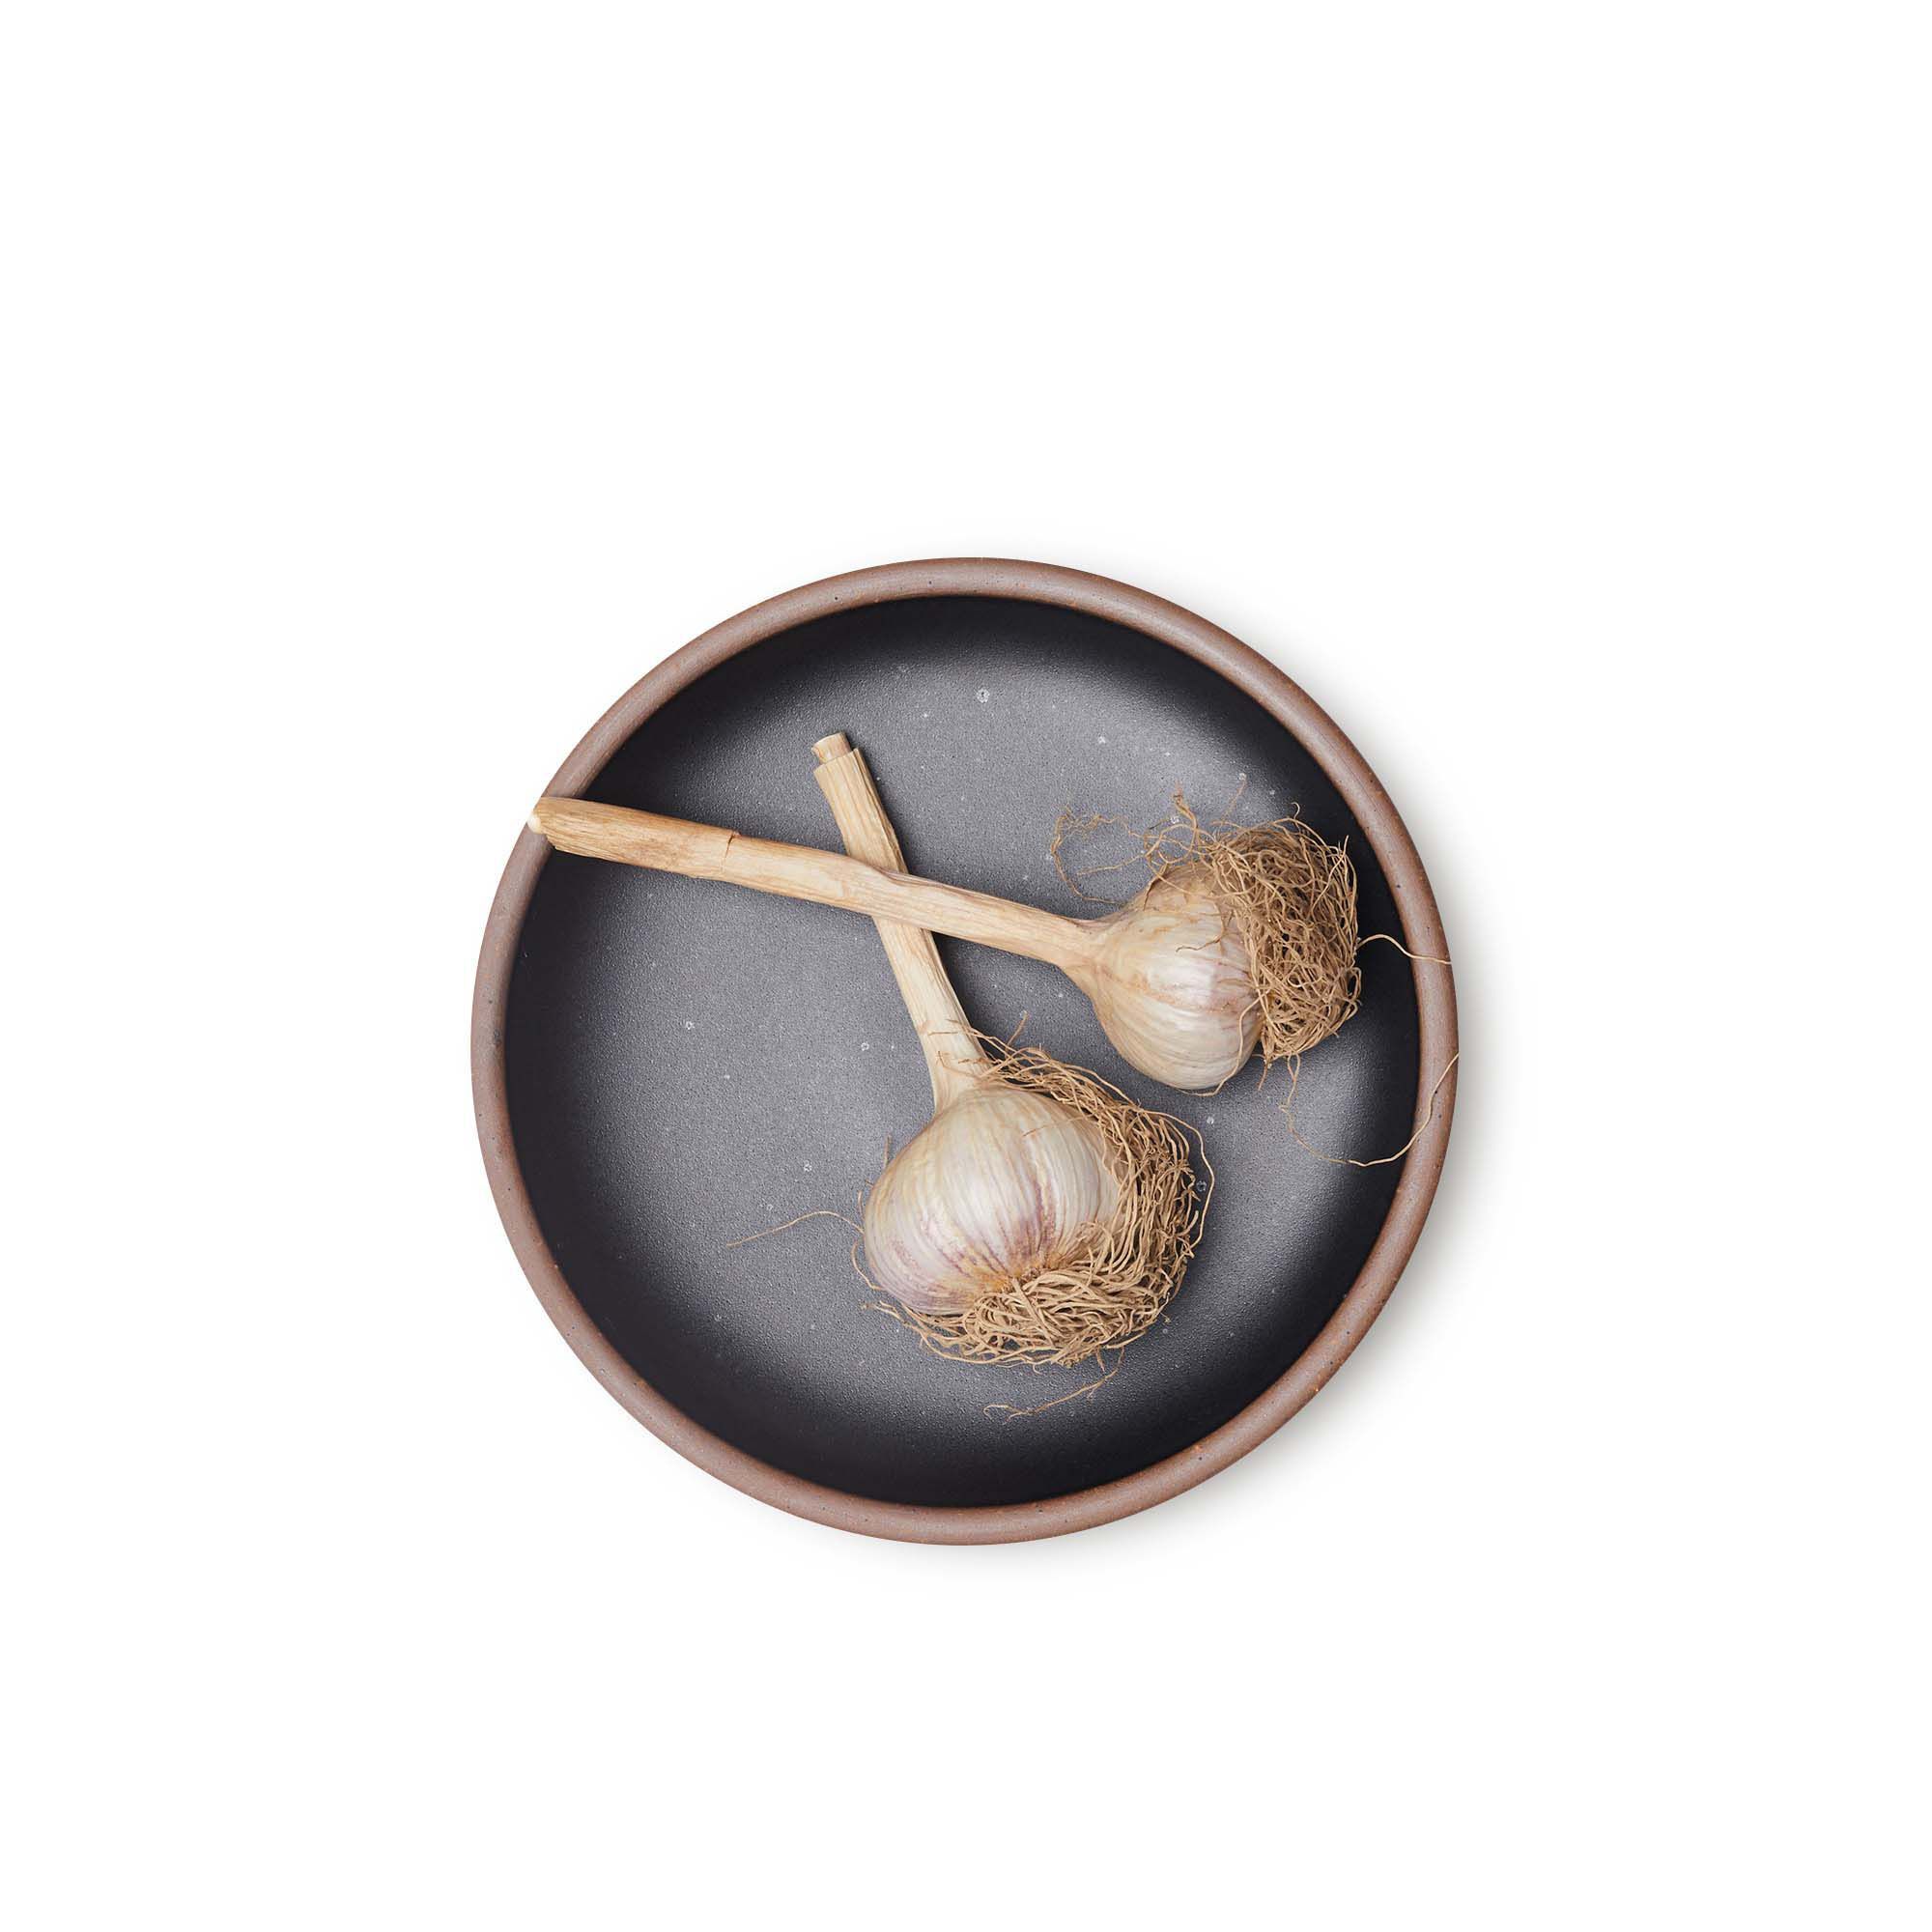 Garlic on a medium sized ceramic plate in a graphite black color featuring iron speckles and an unglazed rim.